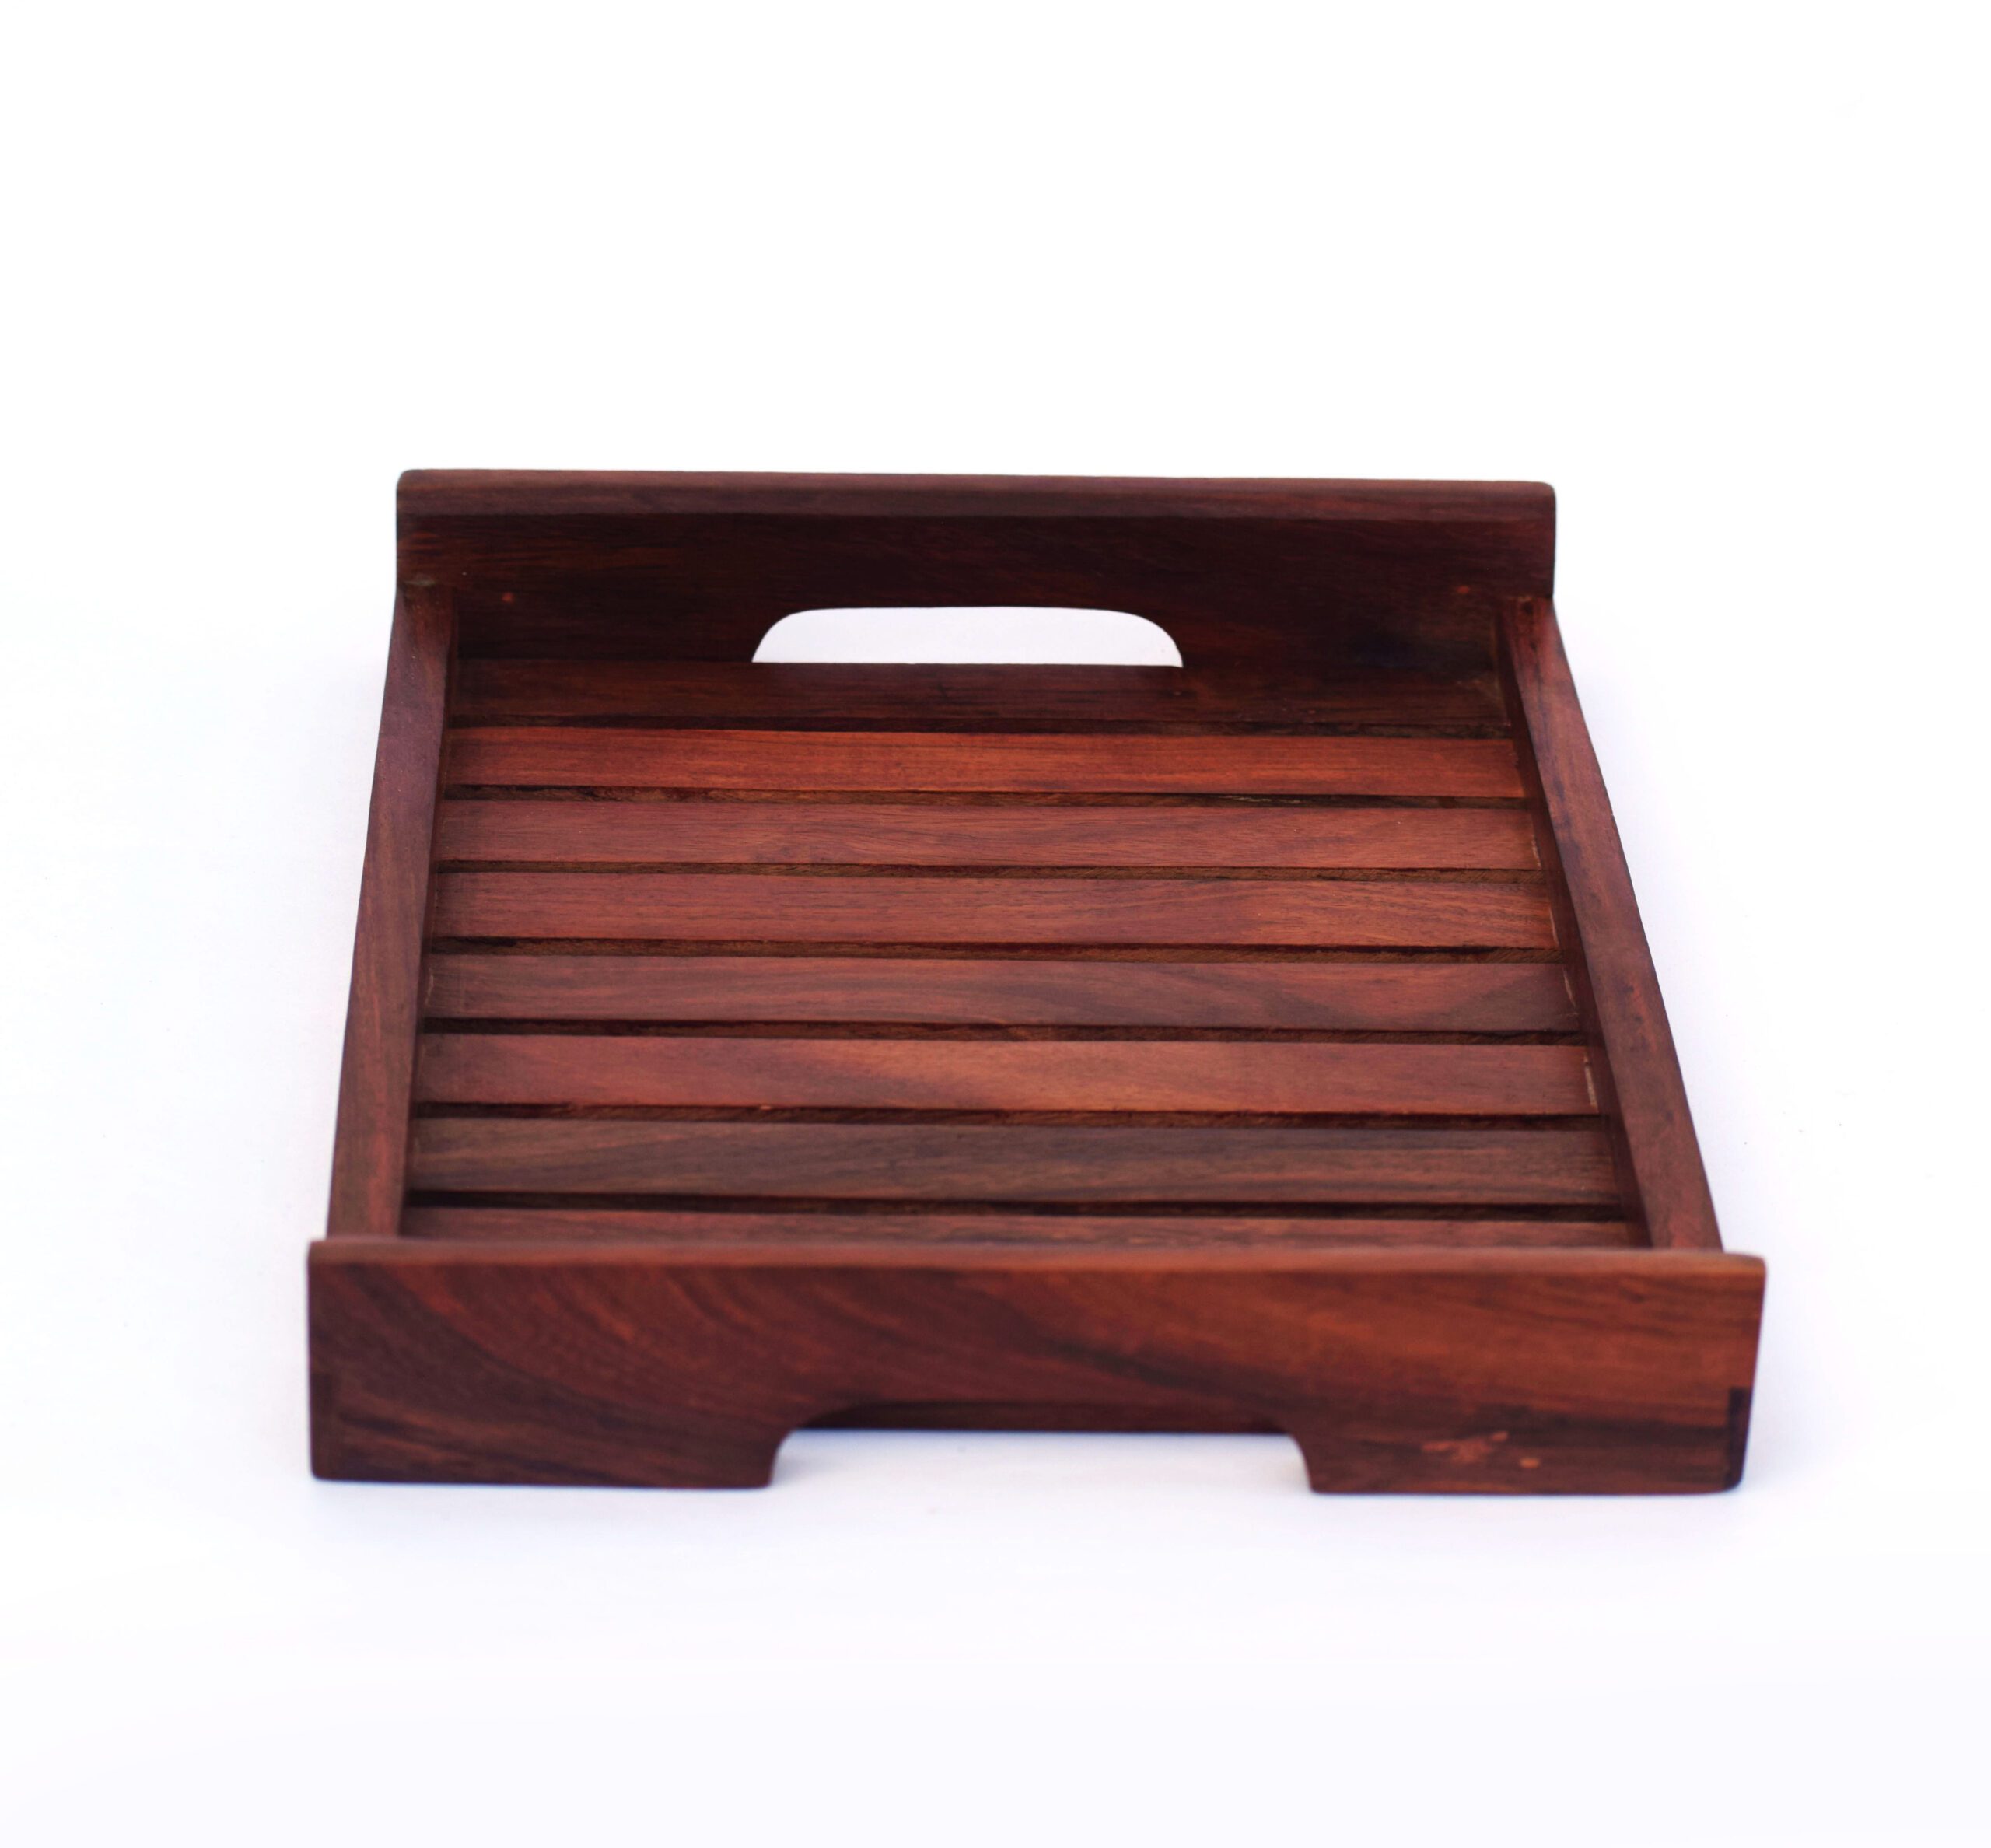 Handcrafted Wood Serving Tray with Handles  | Trays for Coffee Table | Perfect Trendy Breakfast Tray